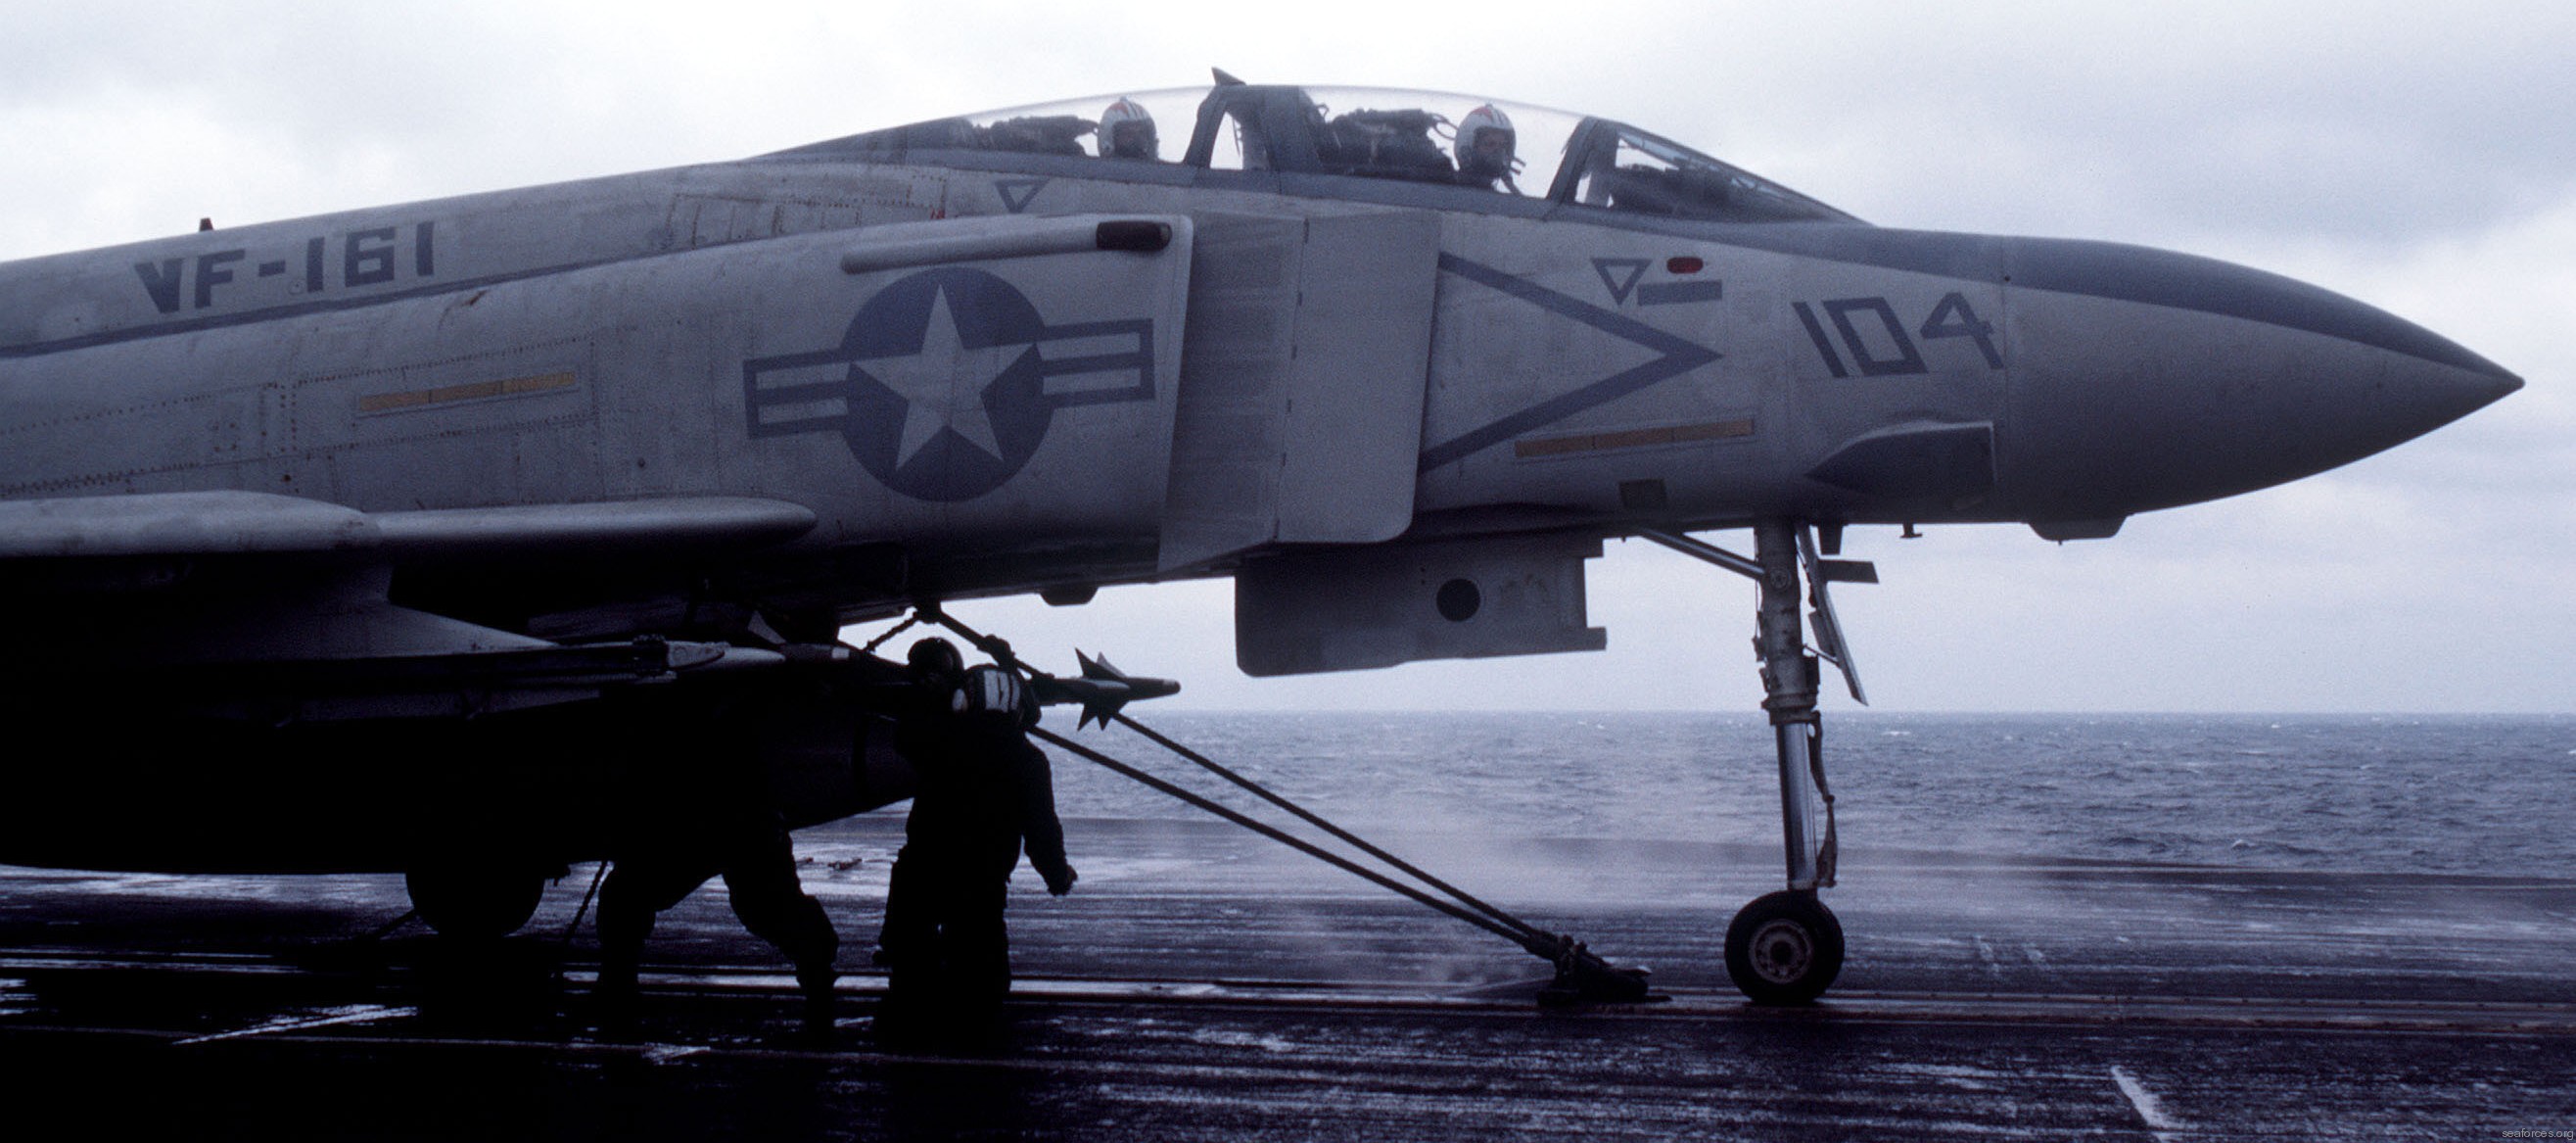 vf-161 chargers fighter squadron navy f-4s phantom ii carrier air wing cvw-5 uss midway cv-41 19